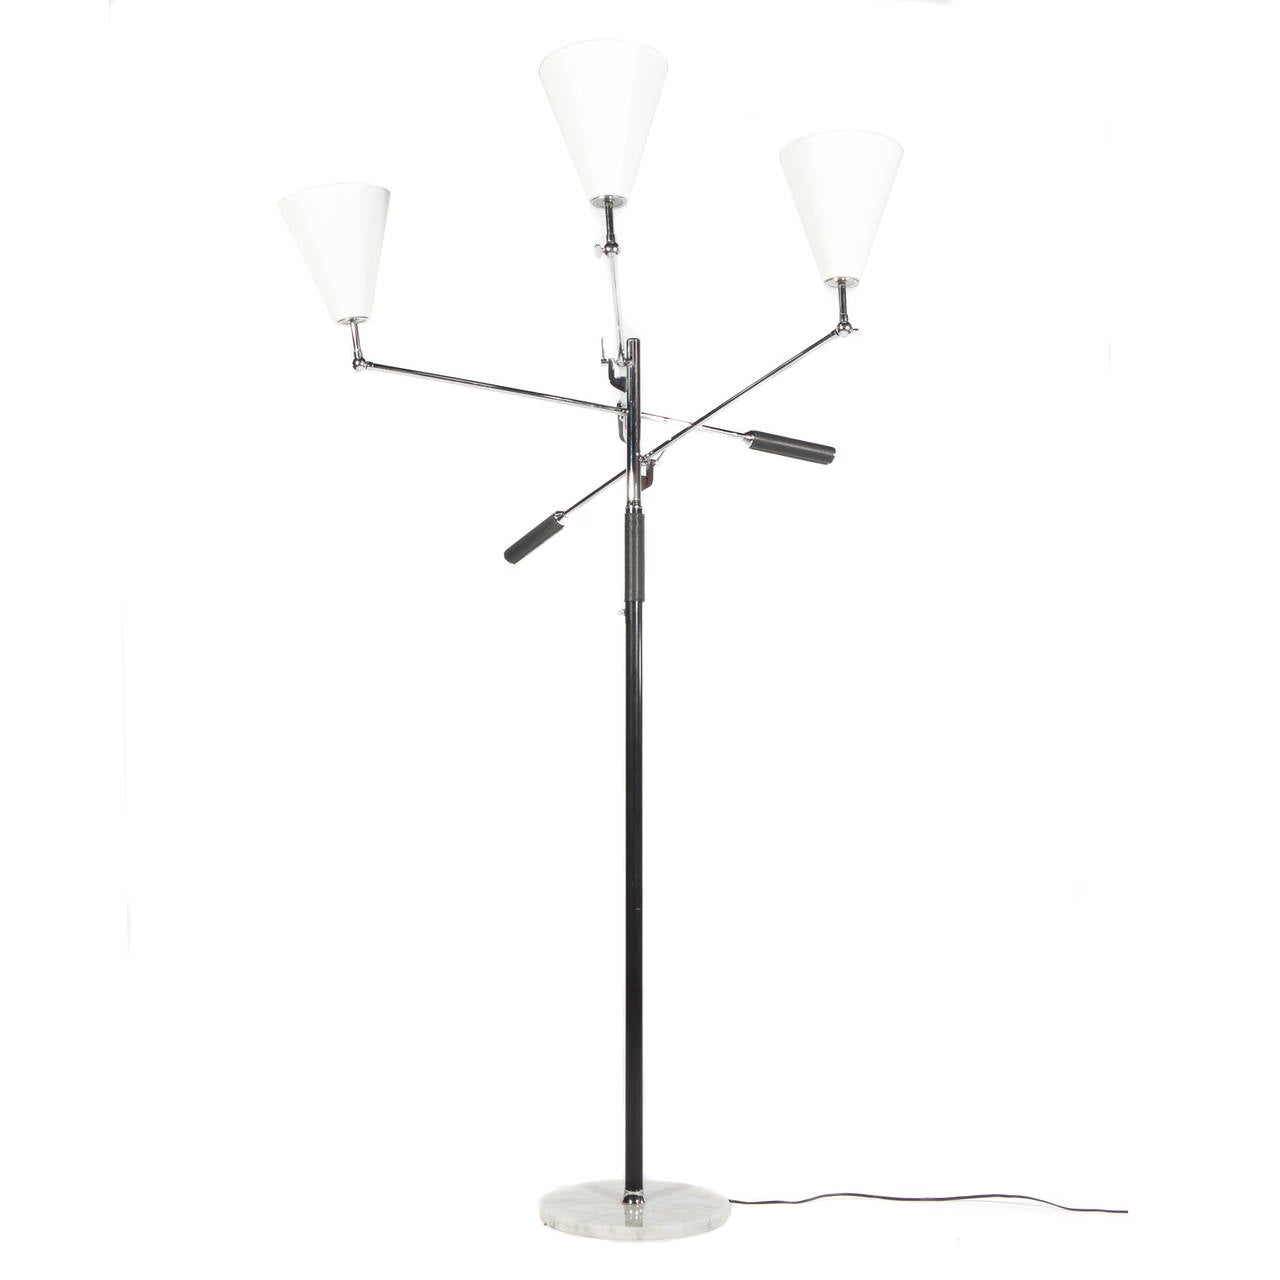 Classic, Arredoluce-style adjustable three-arm floor lamp with pivoting white-enameled cone shades, black-leather handles and chrome hardware. Stamped 